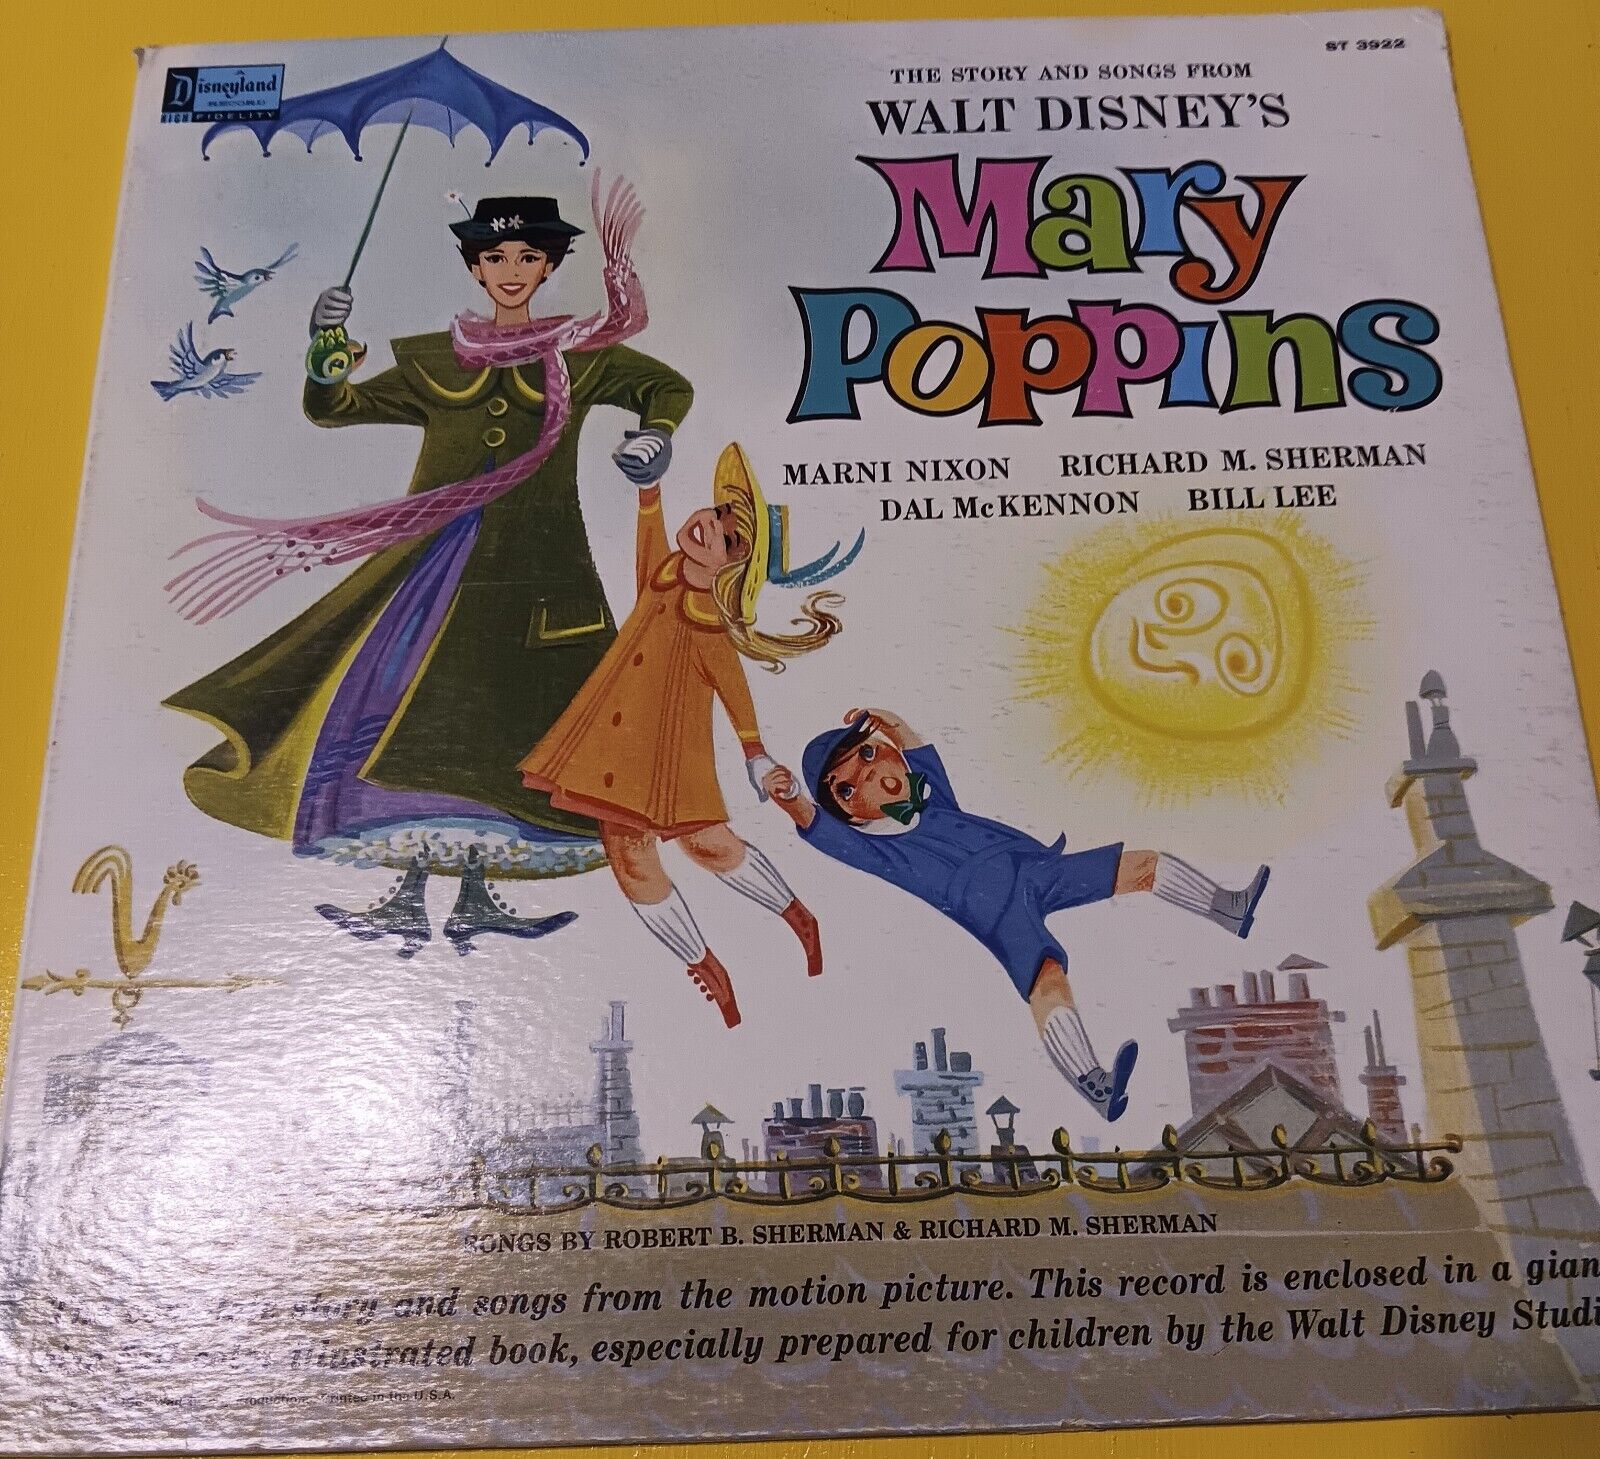 Vintage Disneyland Record and Story Book Mary Poppins